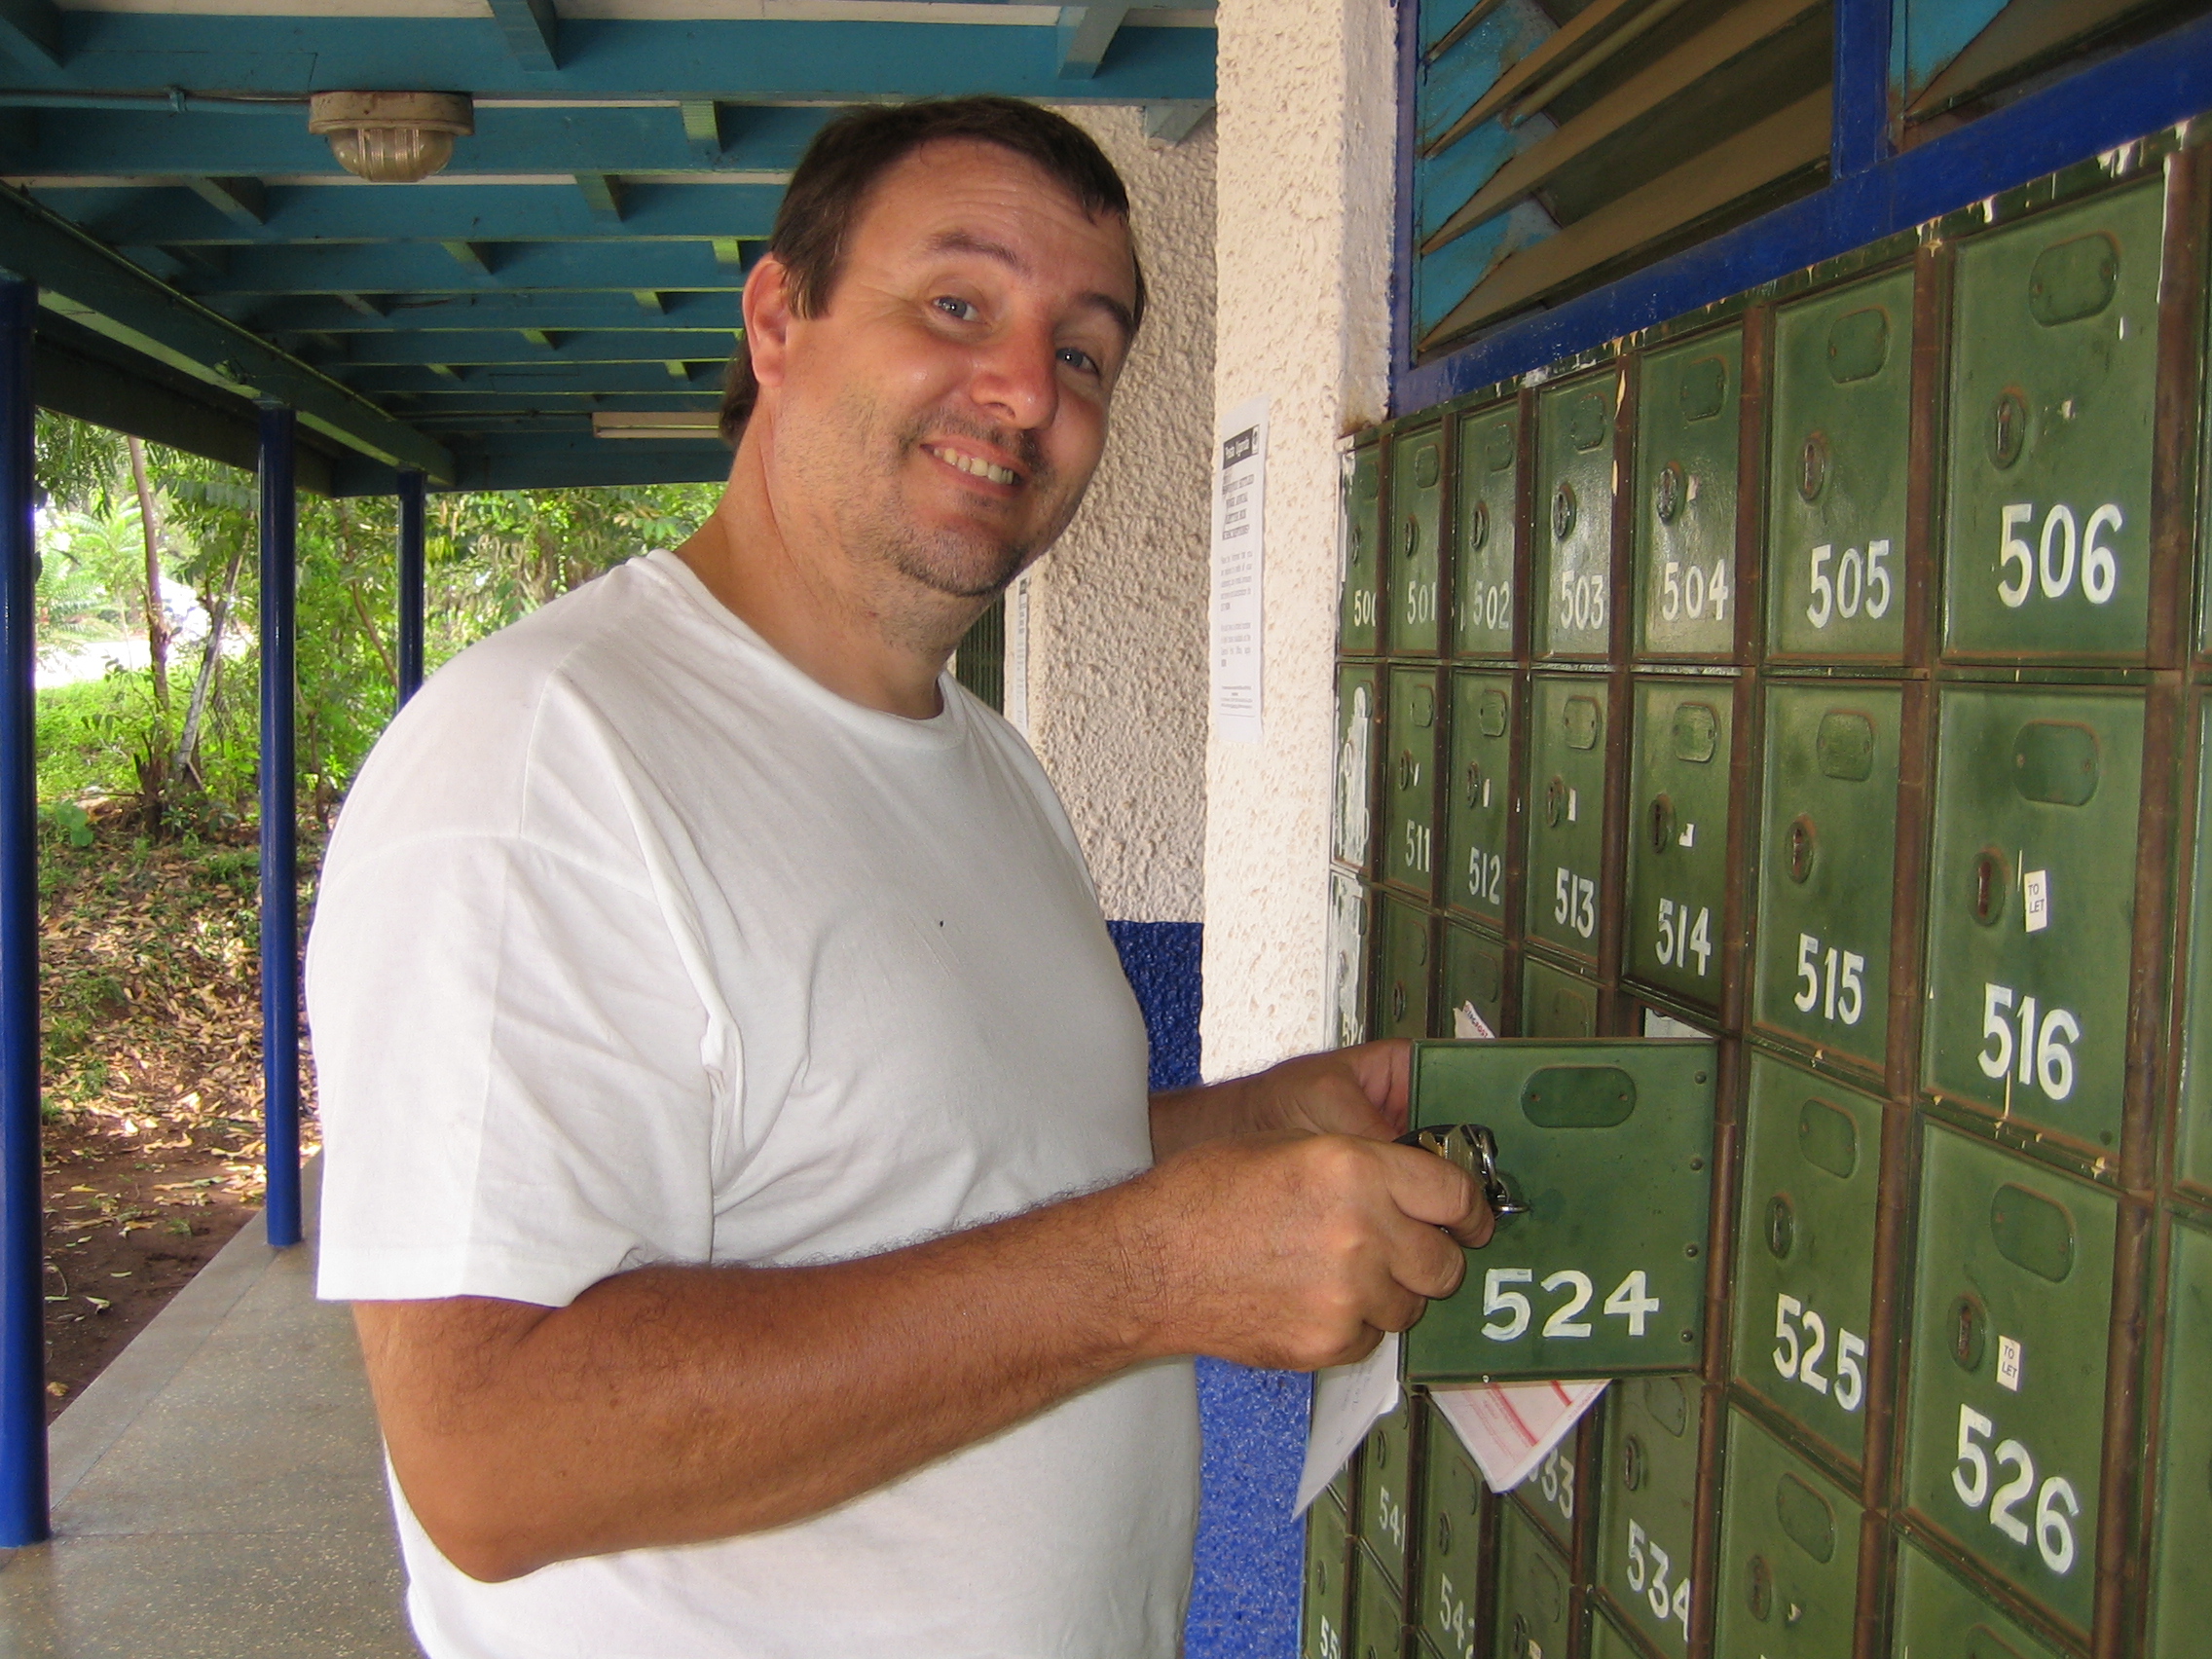 Opening a new Post Office Box